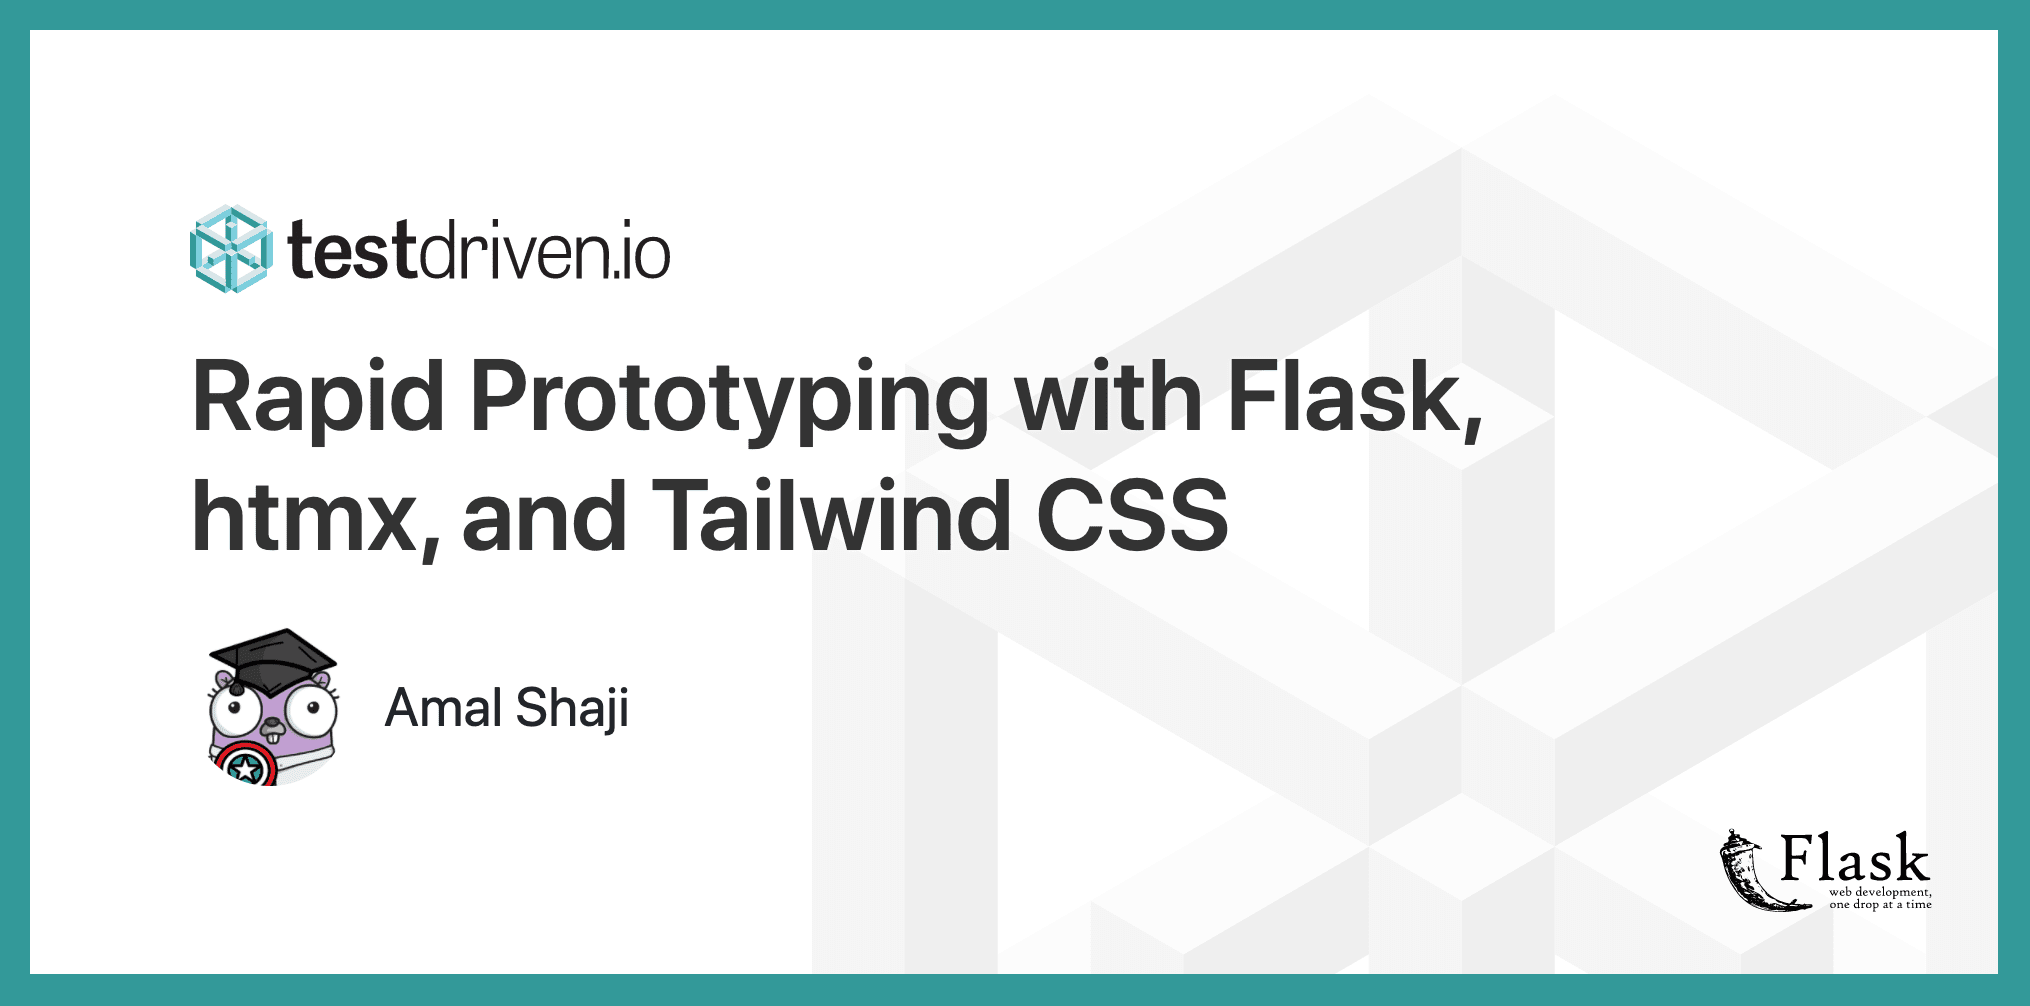 Rapid Prototyping with Flask, htmx, and Tailwind CSS